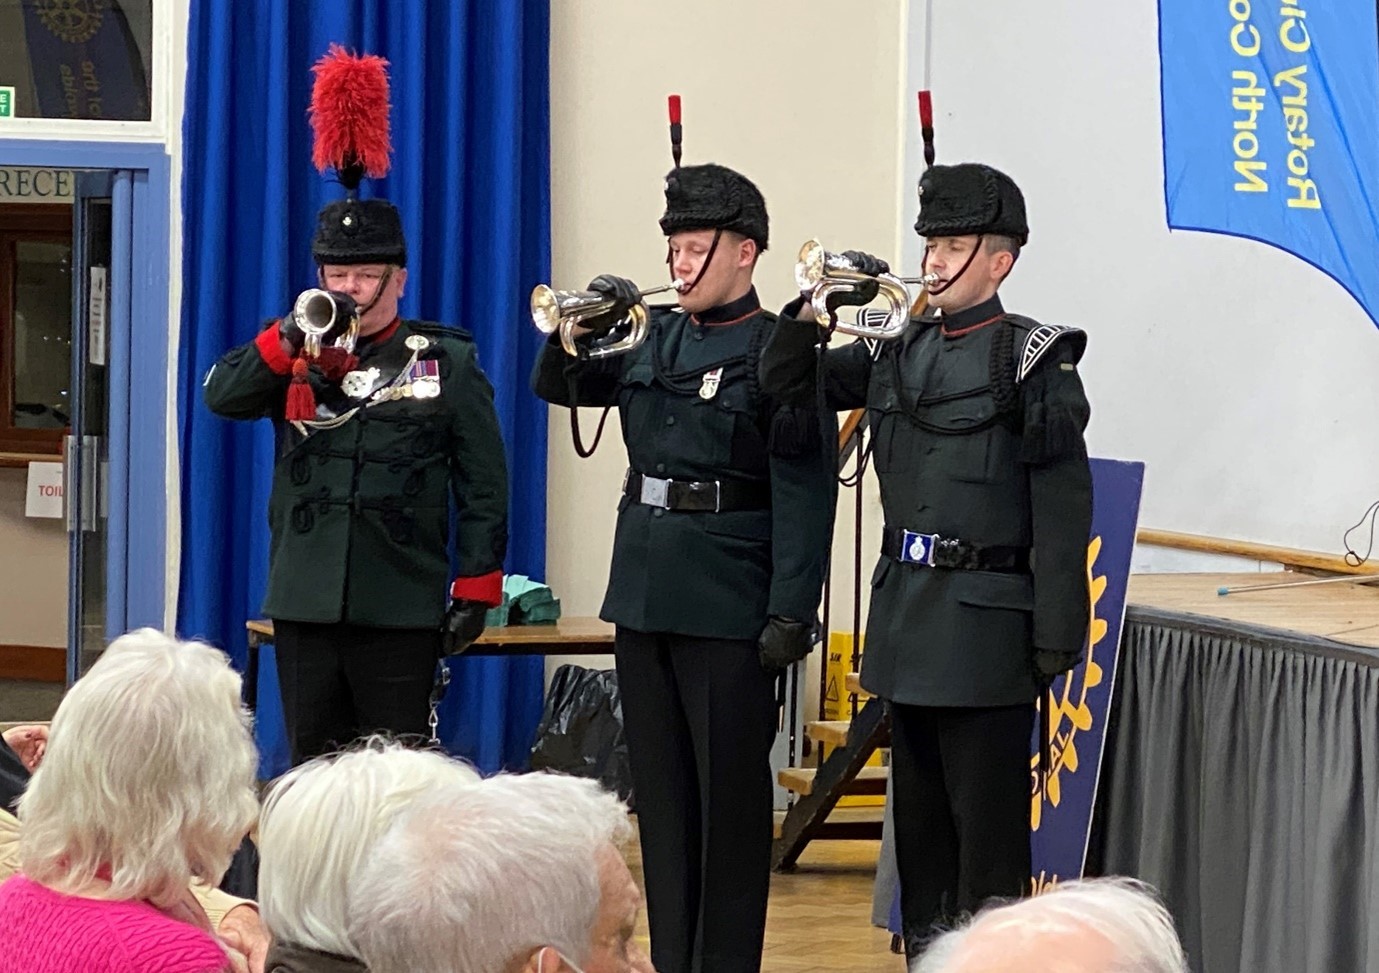 Buglers raised the roof playing some of their most popular marches